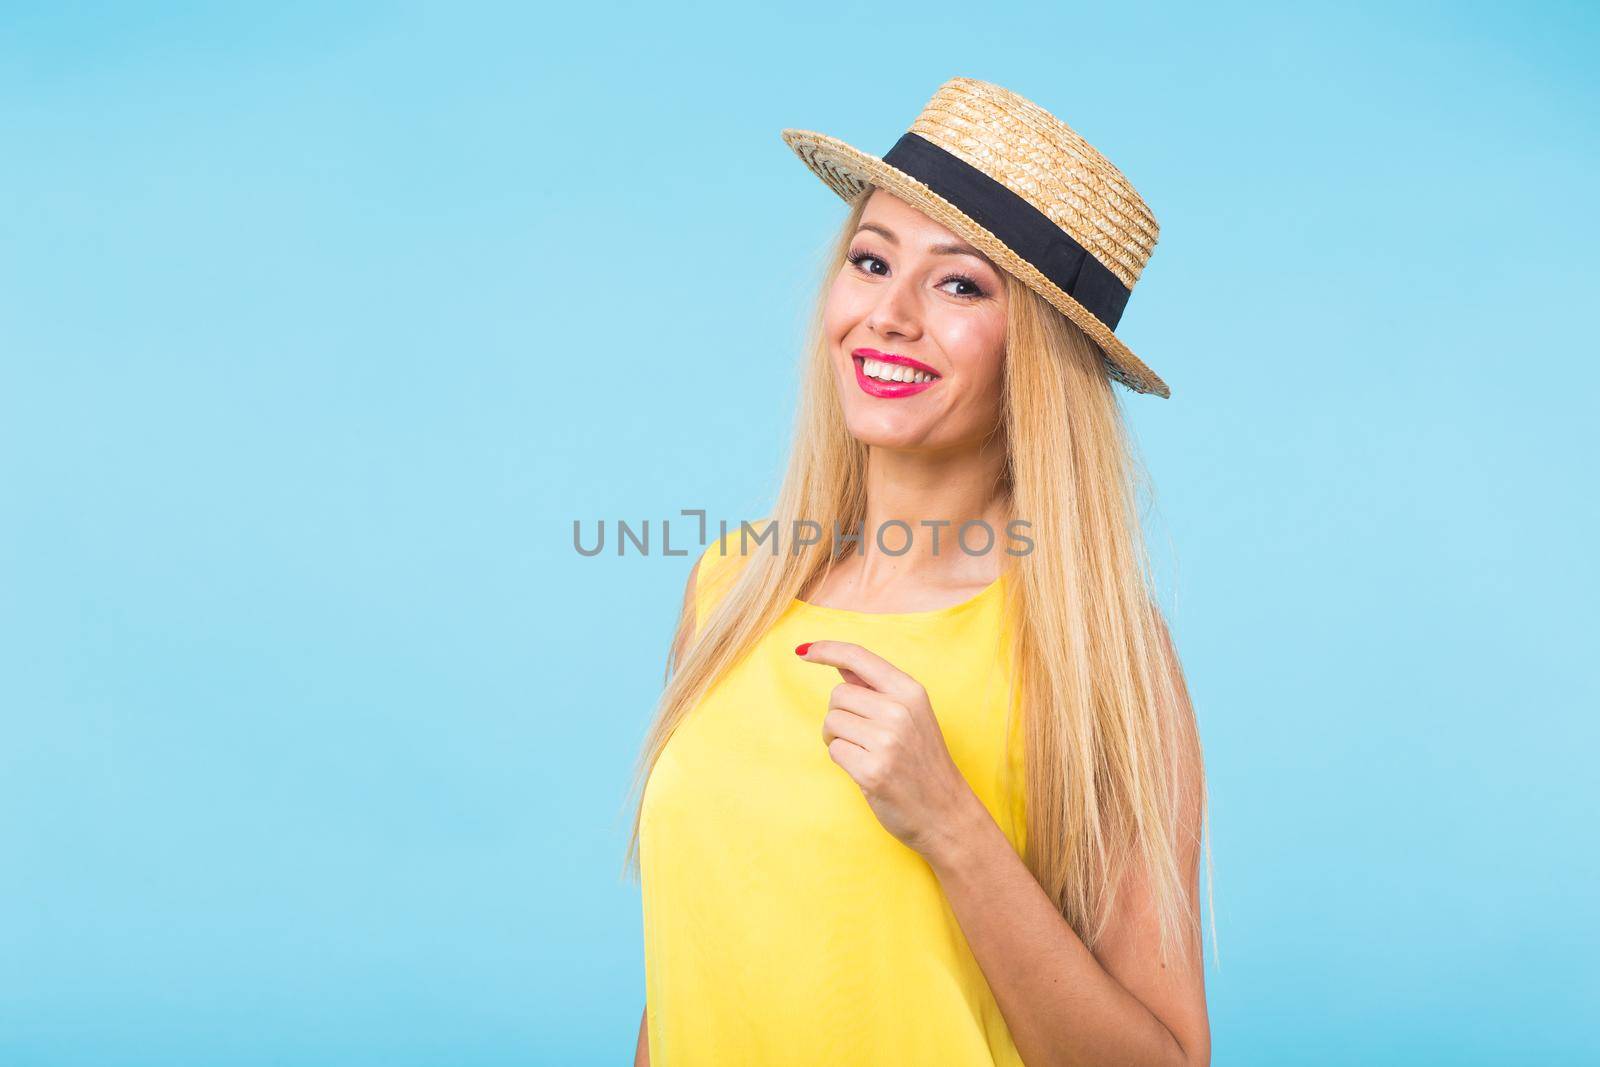 Young woman fashion lookbook model studio portrait on blue background with copyspace by Satura86